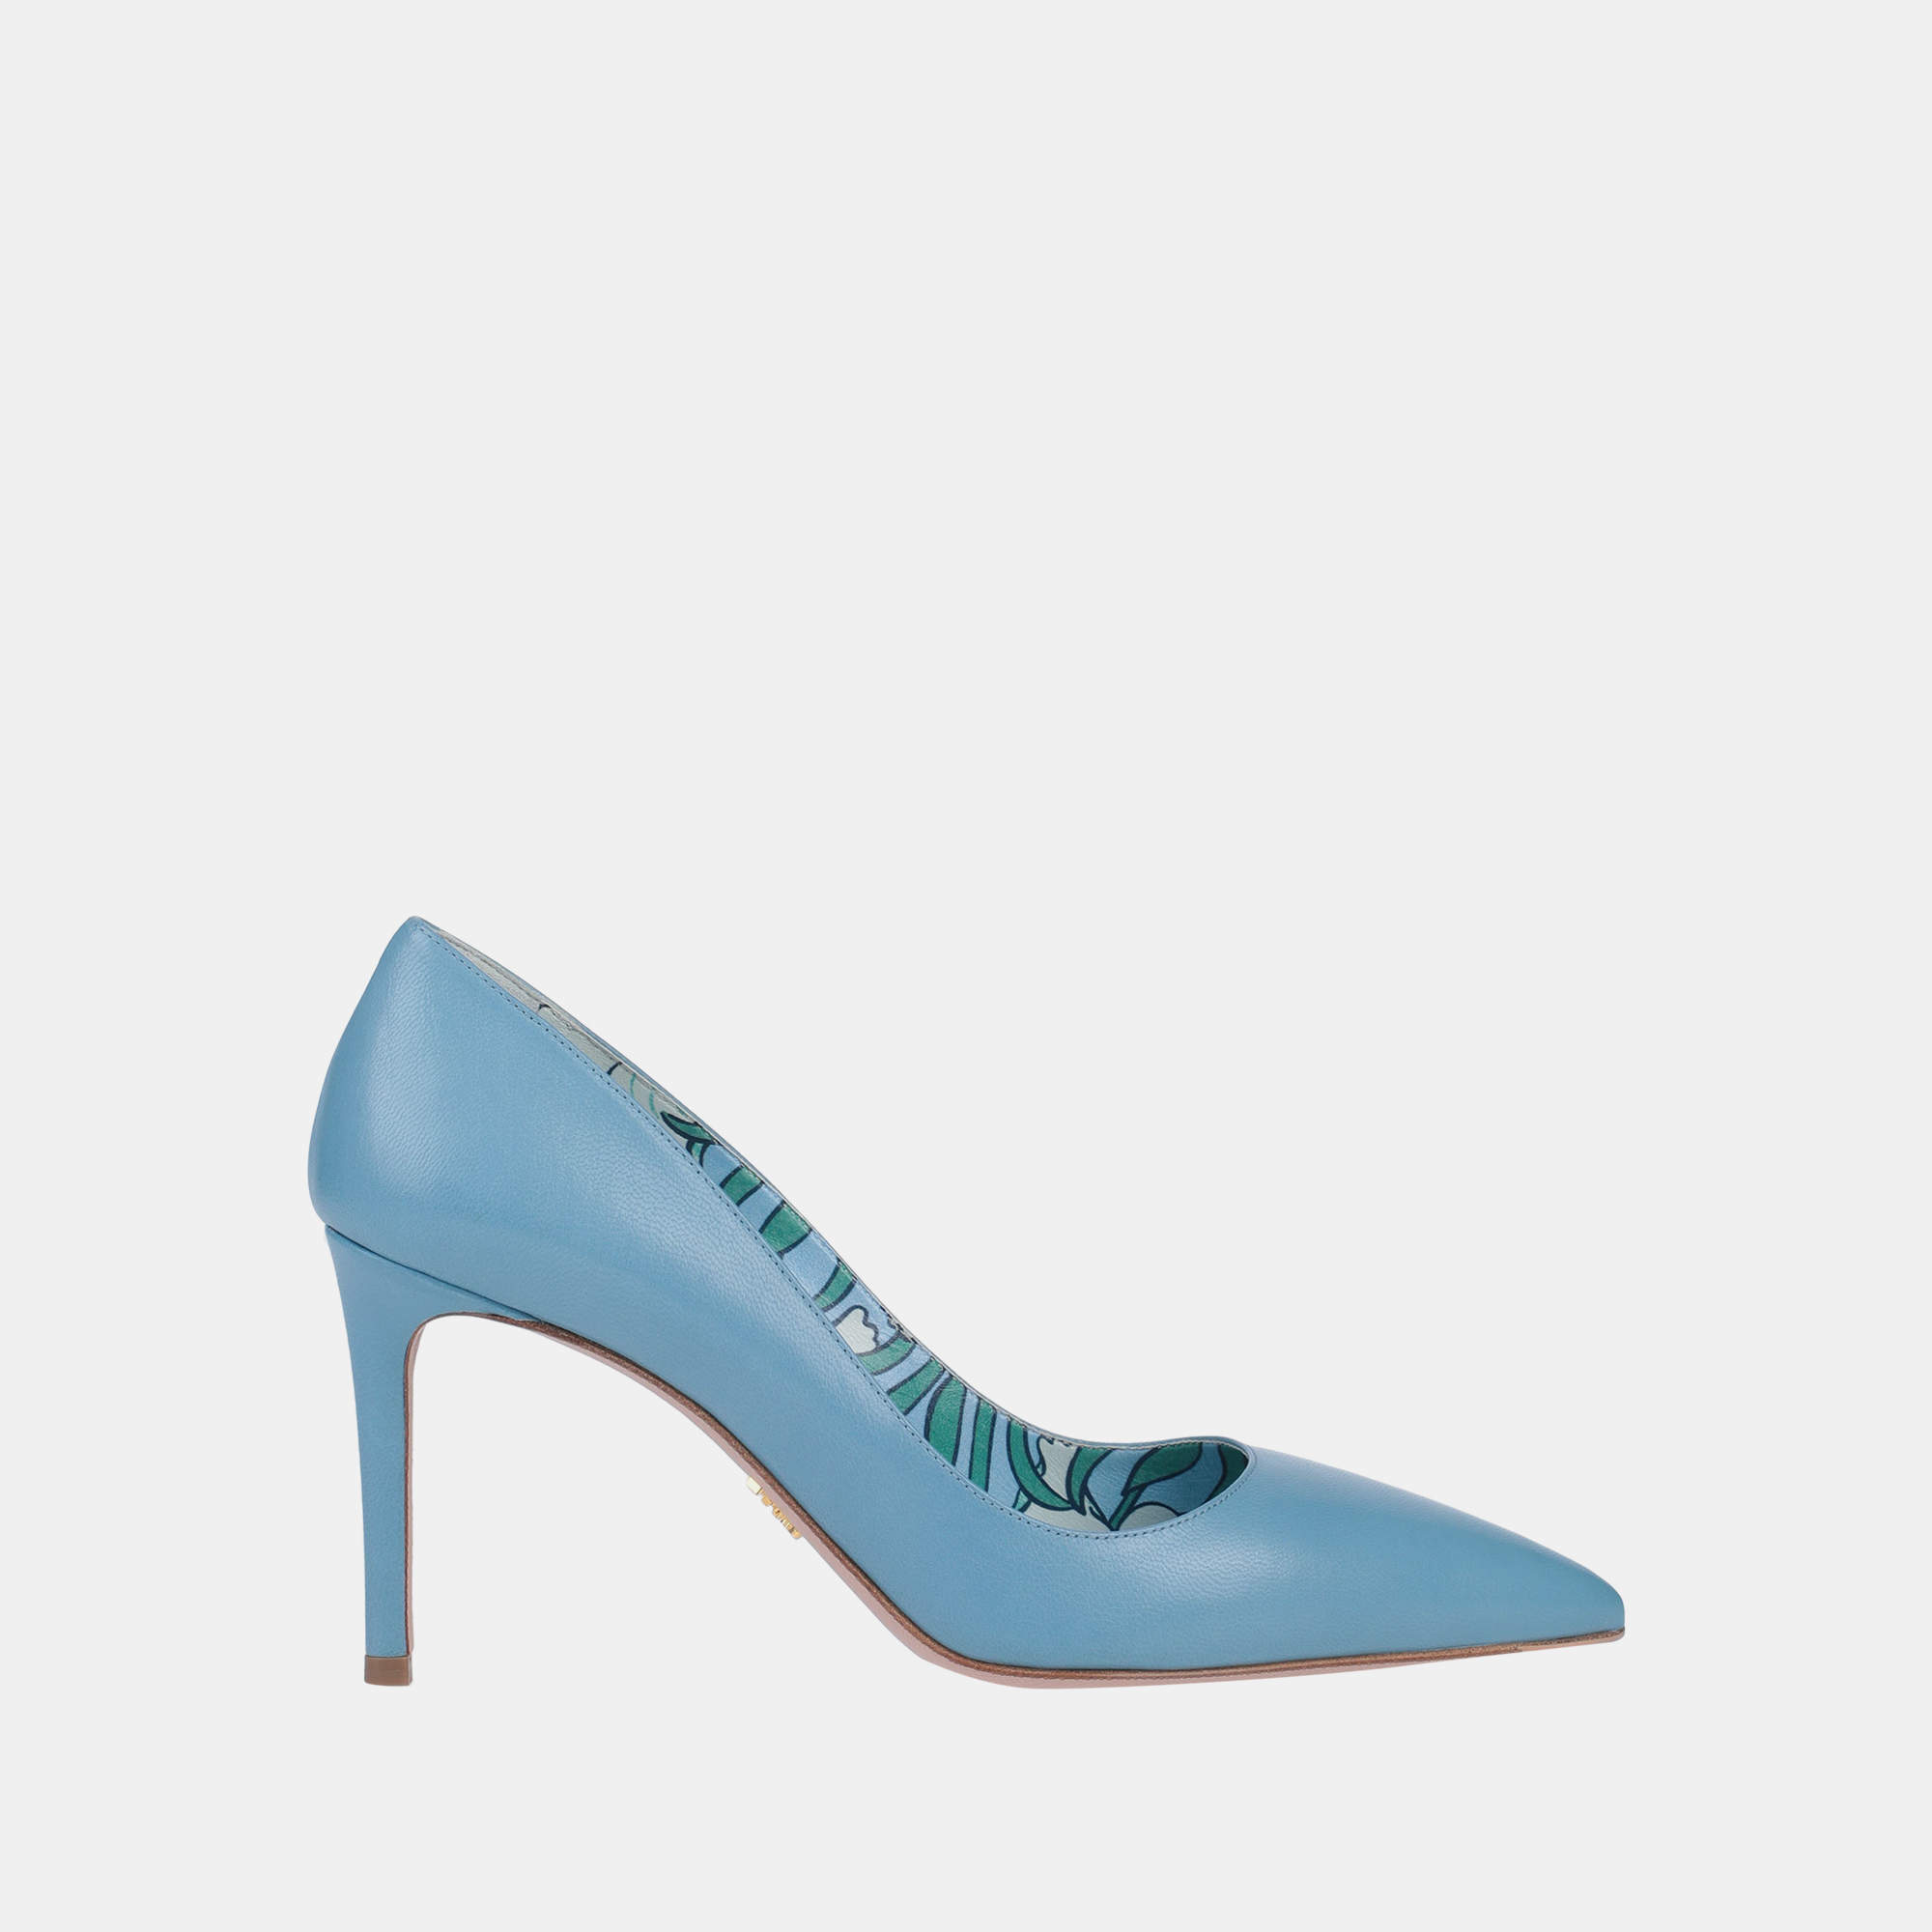 Prada Leather Pointed Toe Pumps 40